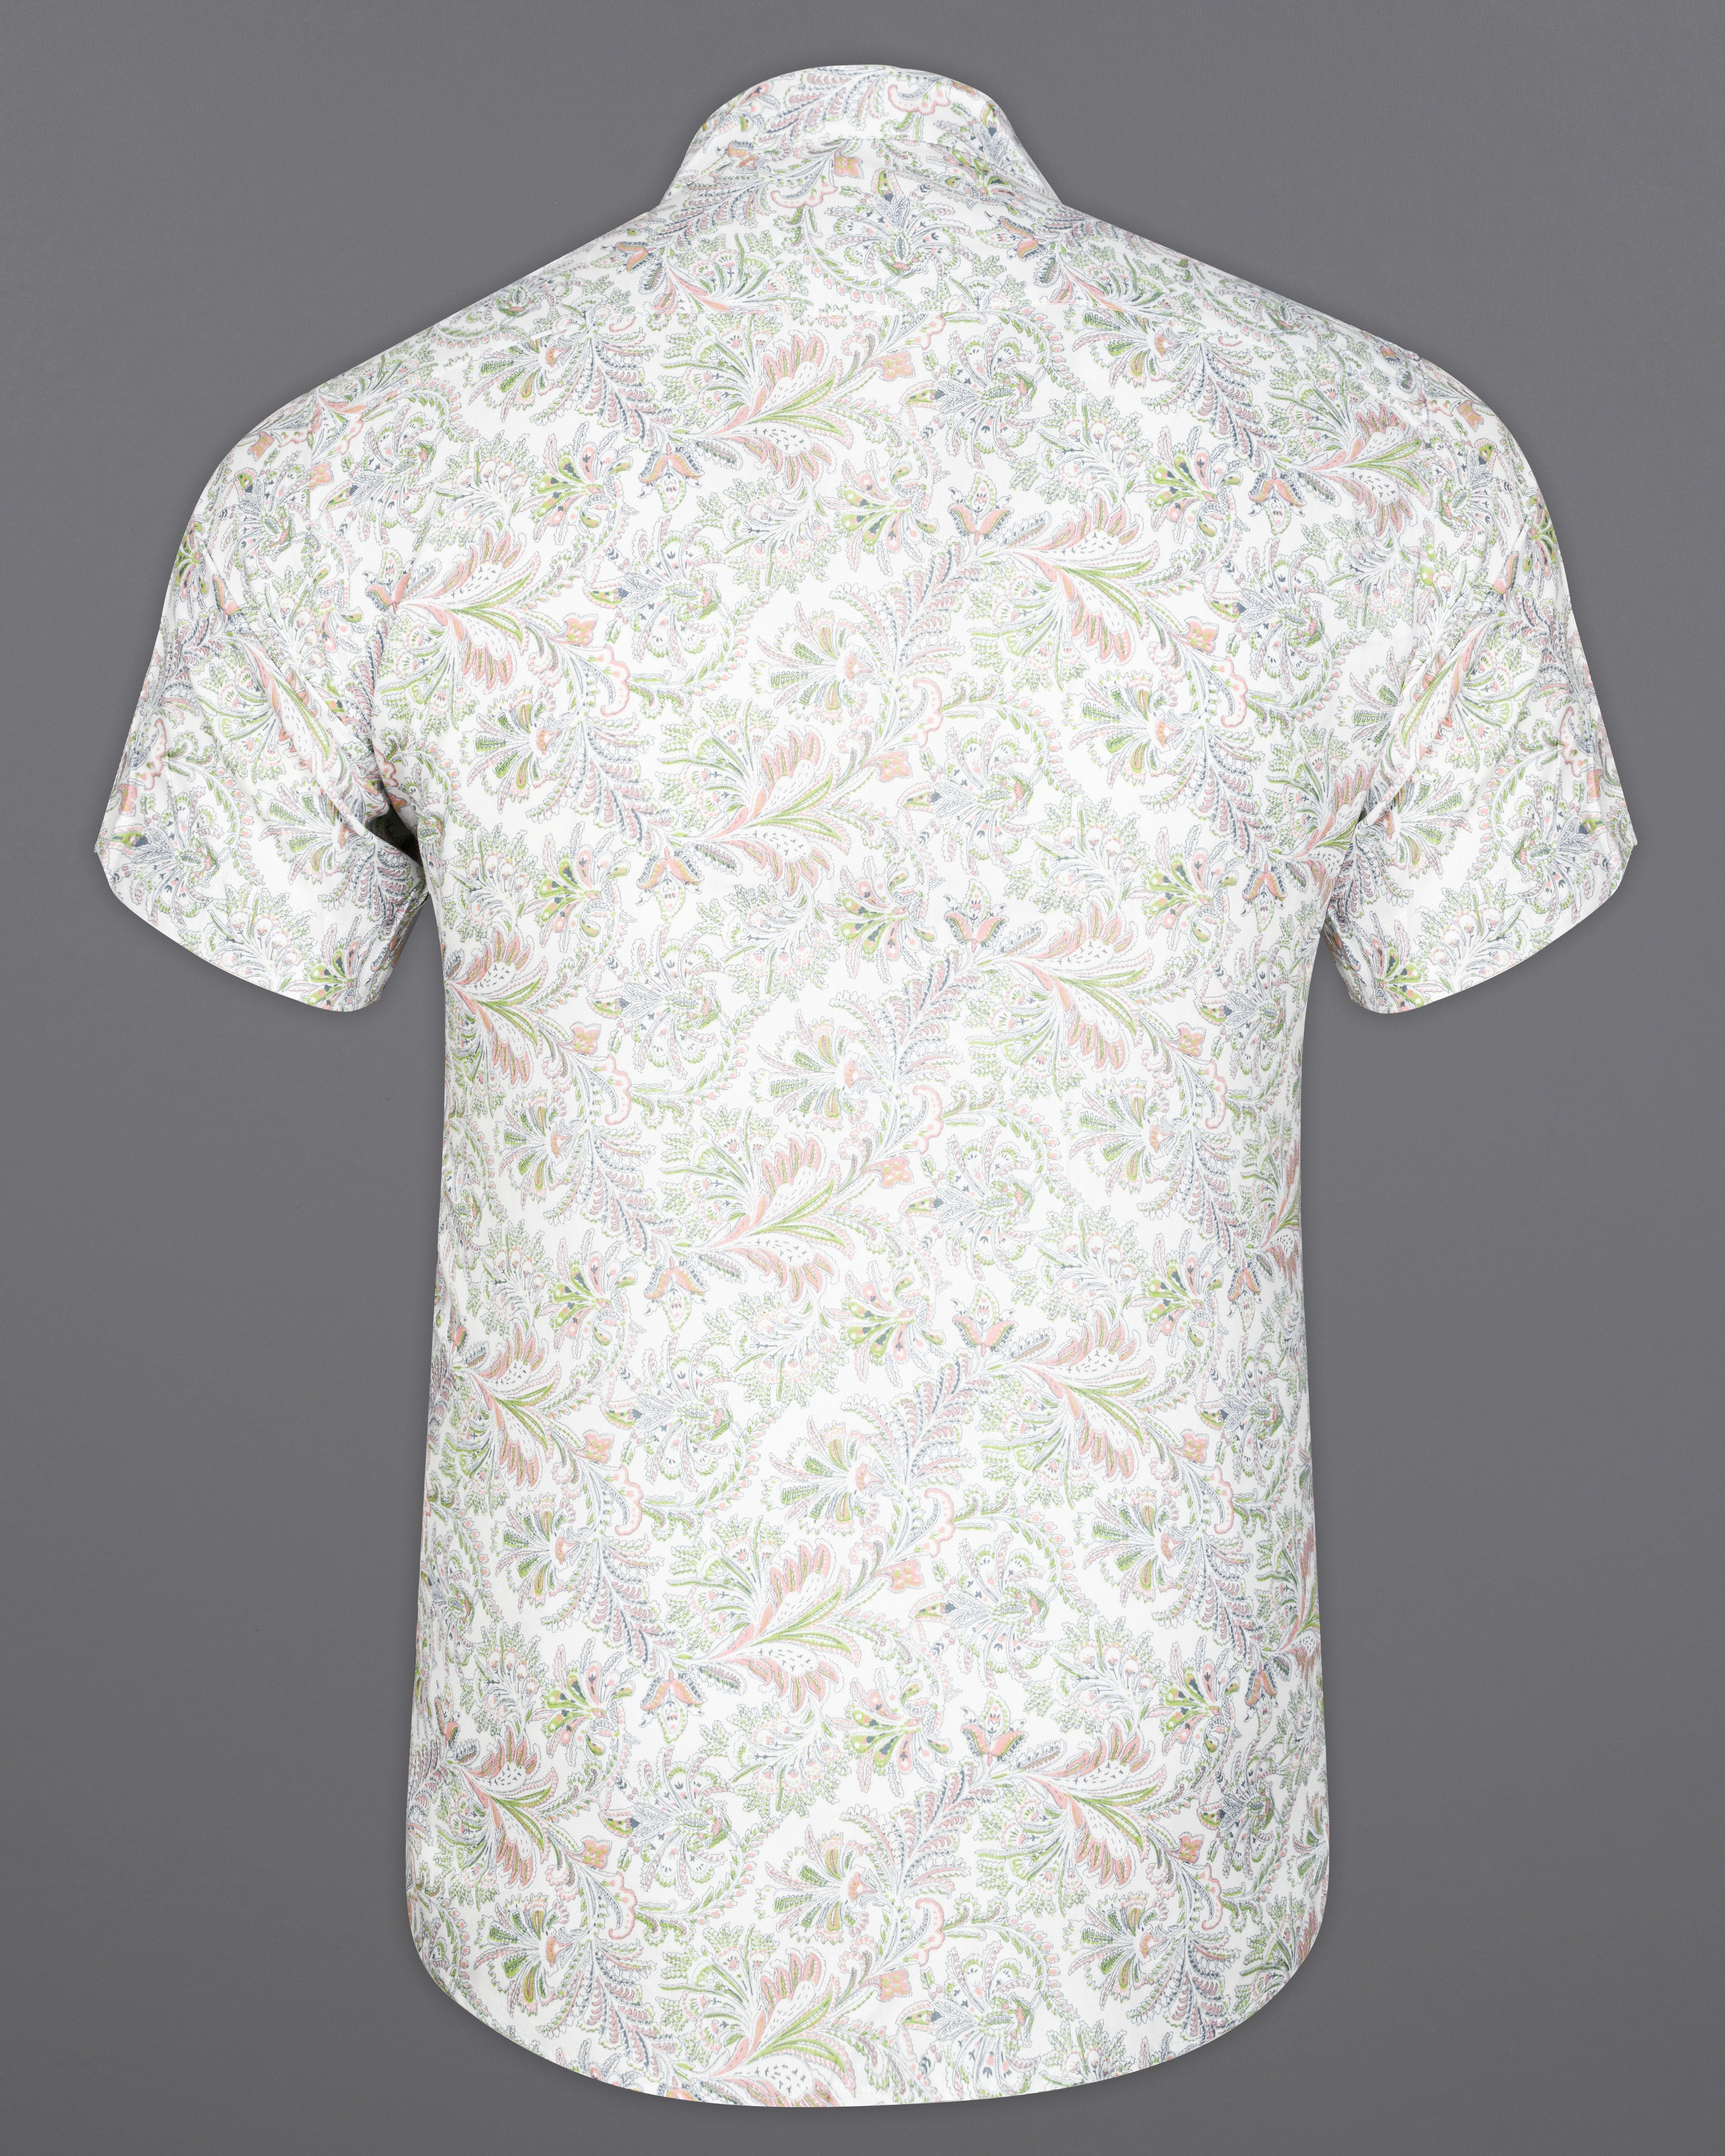 Bright White with Multicolour Tropical Printed Premium Tencel Half Sleeves Shirt